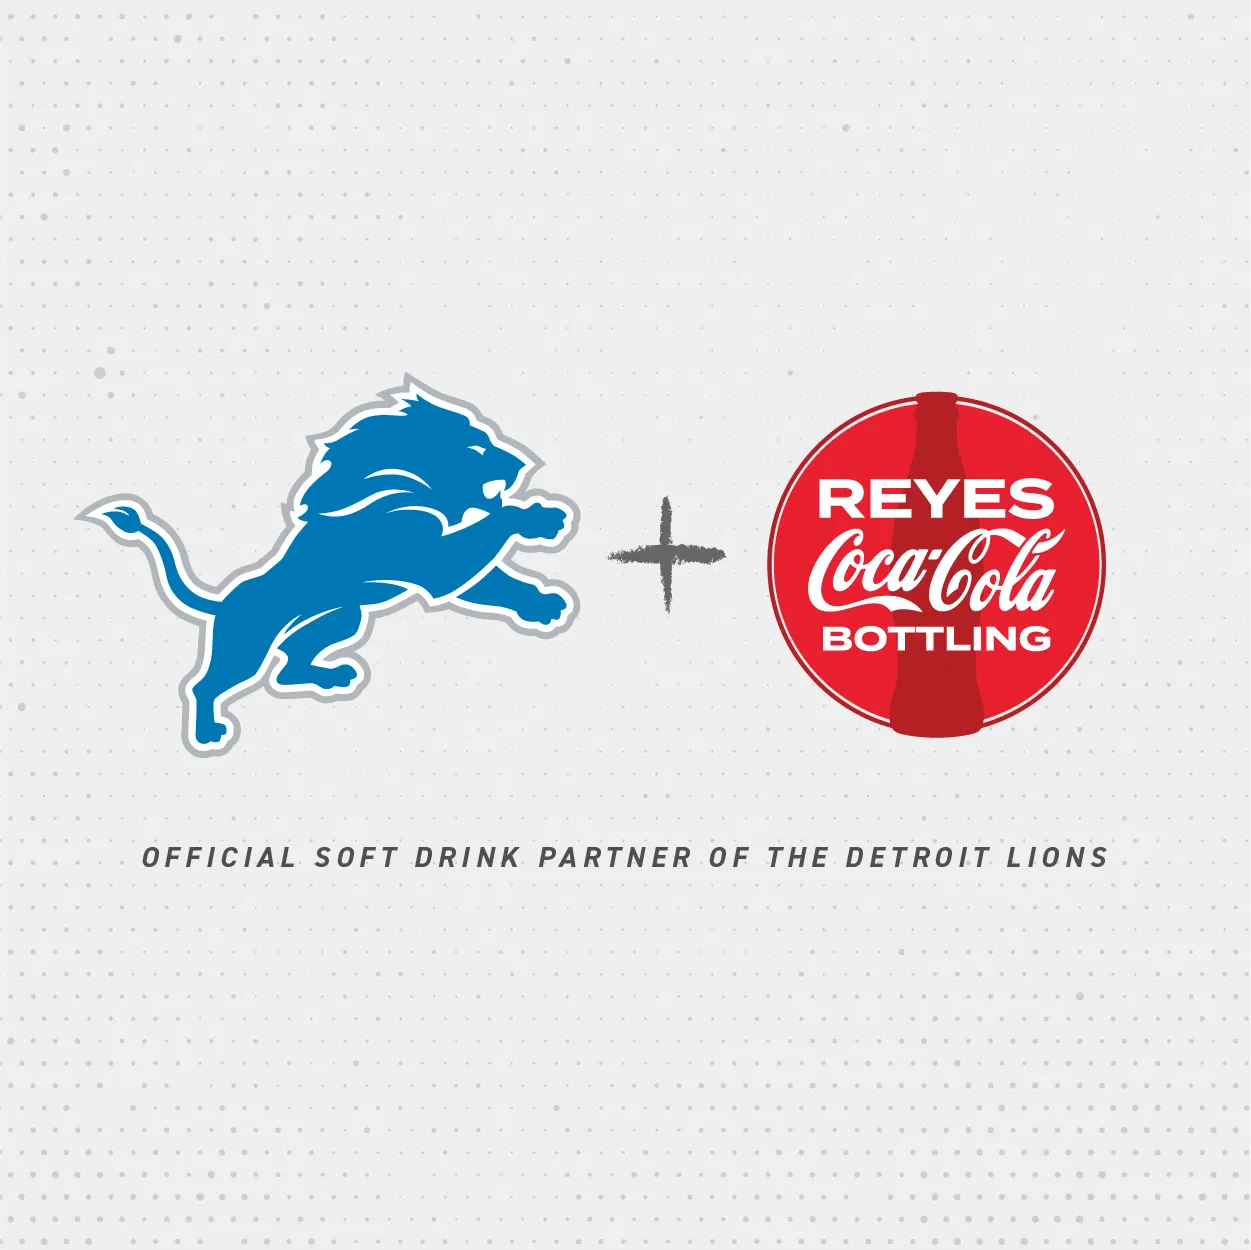 The logos of the "Detroit Lions" and "Reyers Coca Cola Bottling"